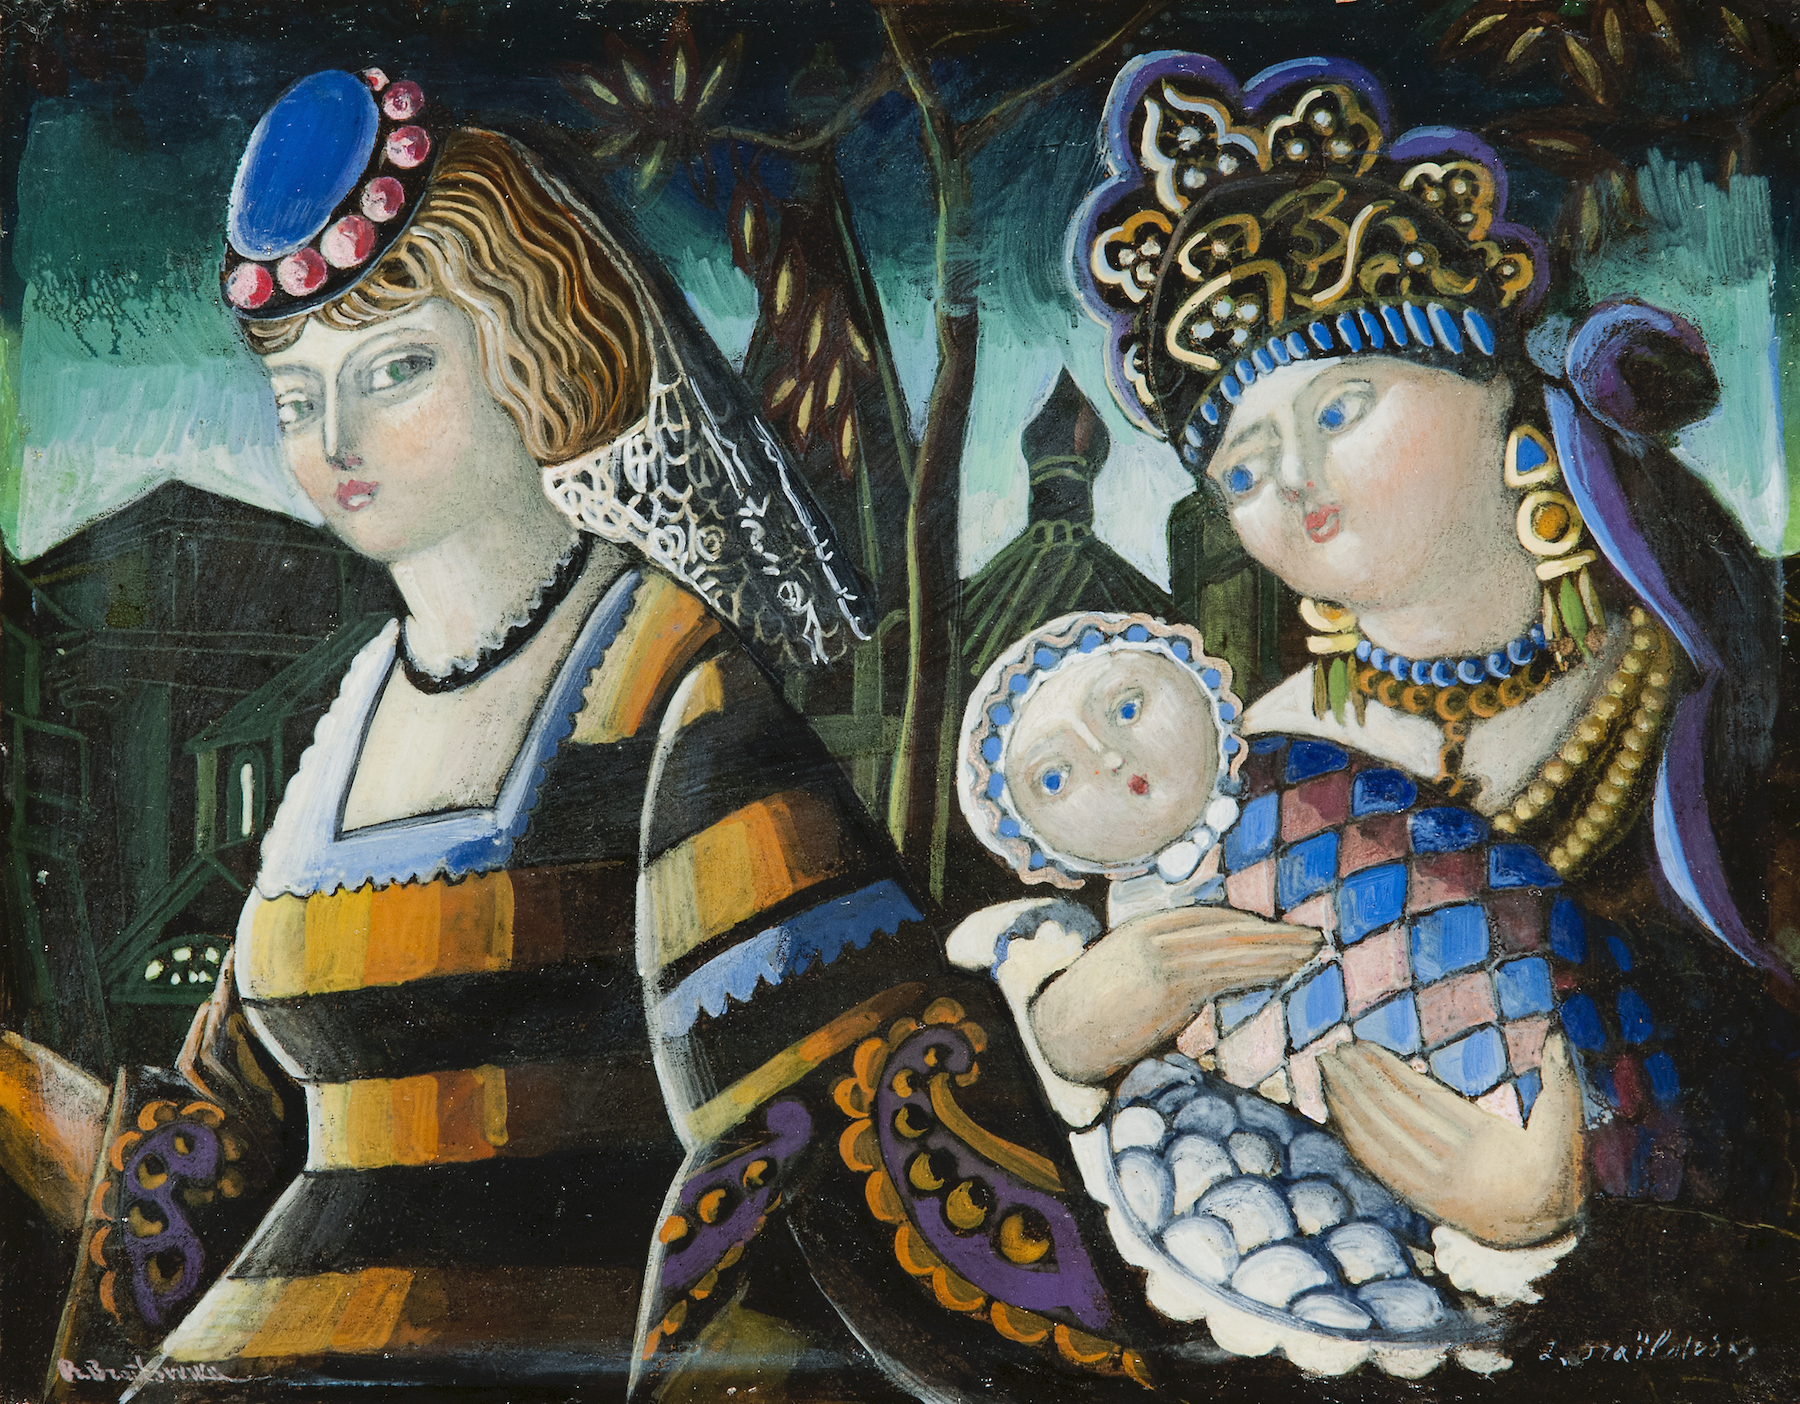 Two Women with Child